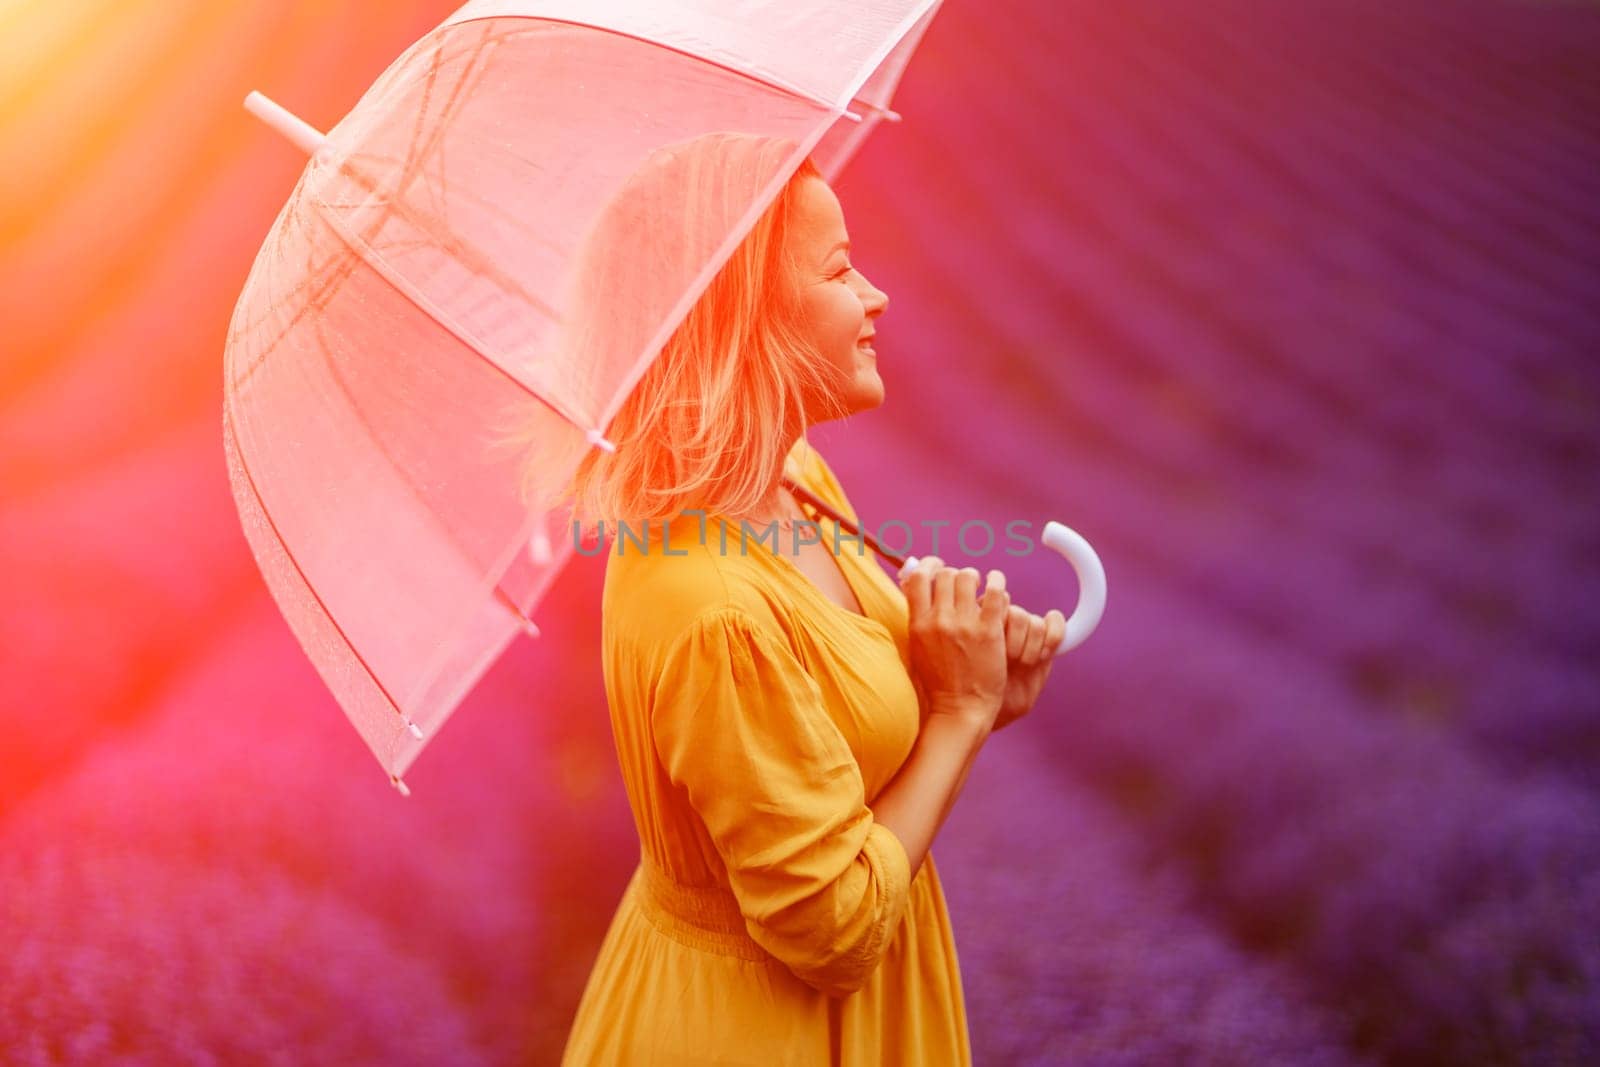 Woman lavender field. A middle-aged woman in a lavender field walks under an umbrella on a rainy day and enjoys aromatherapy. Aromatherapy concept, lavender oil, photo session in lavender.